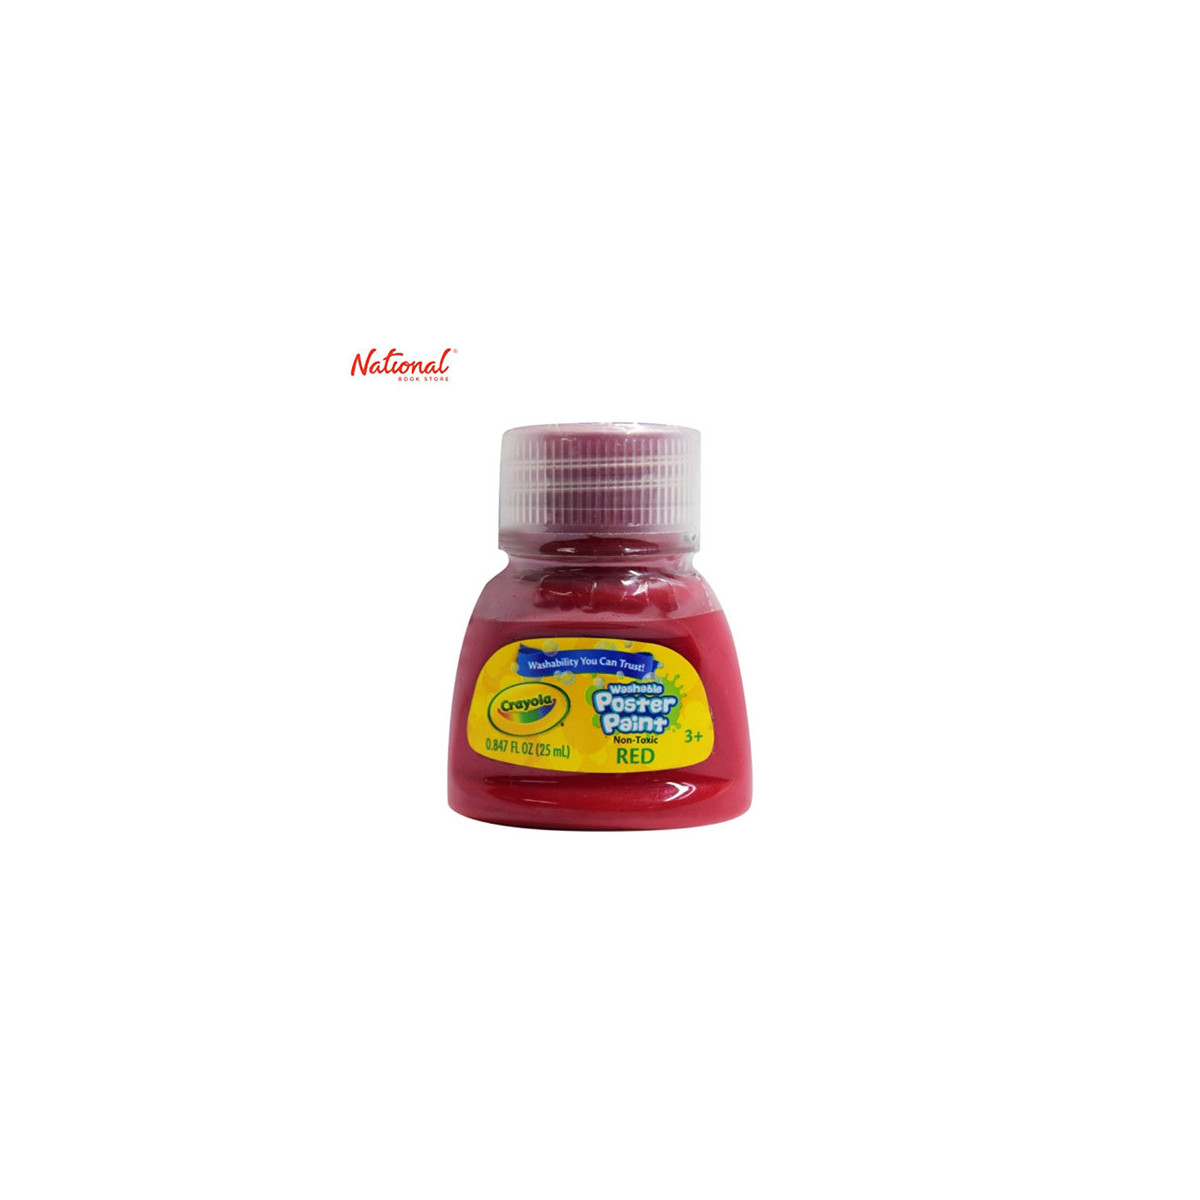 CRAYOLA WASHABLE POSTER PAINT 54-2001-0-138 RED